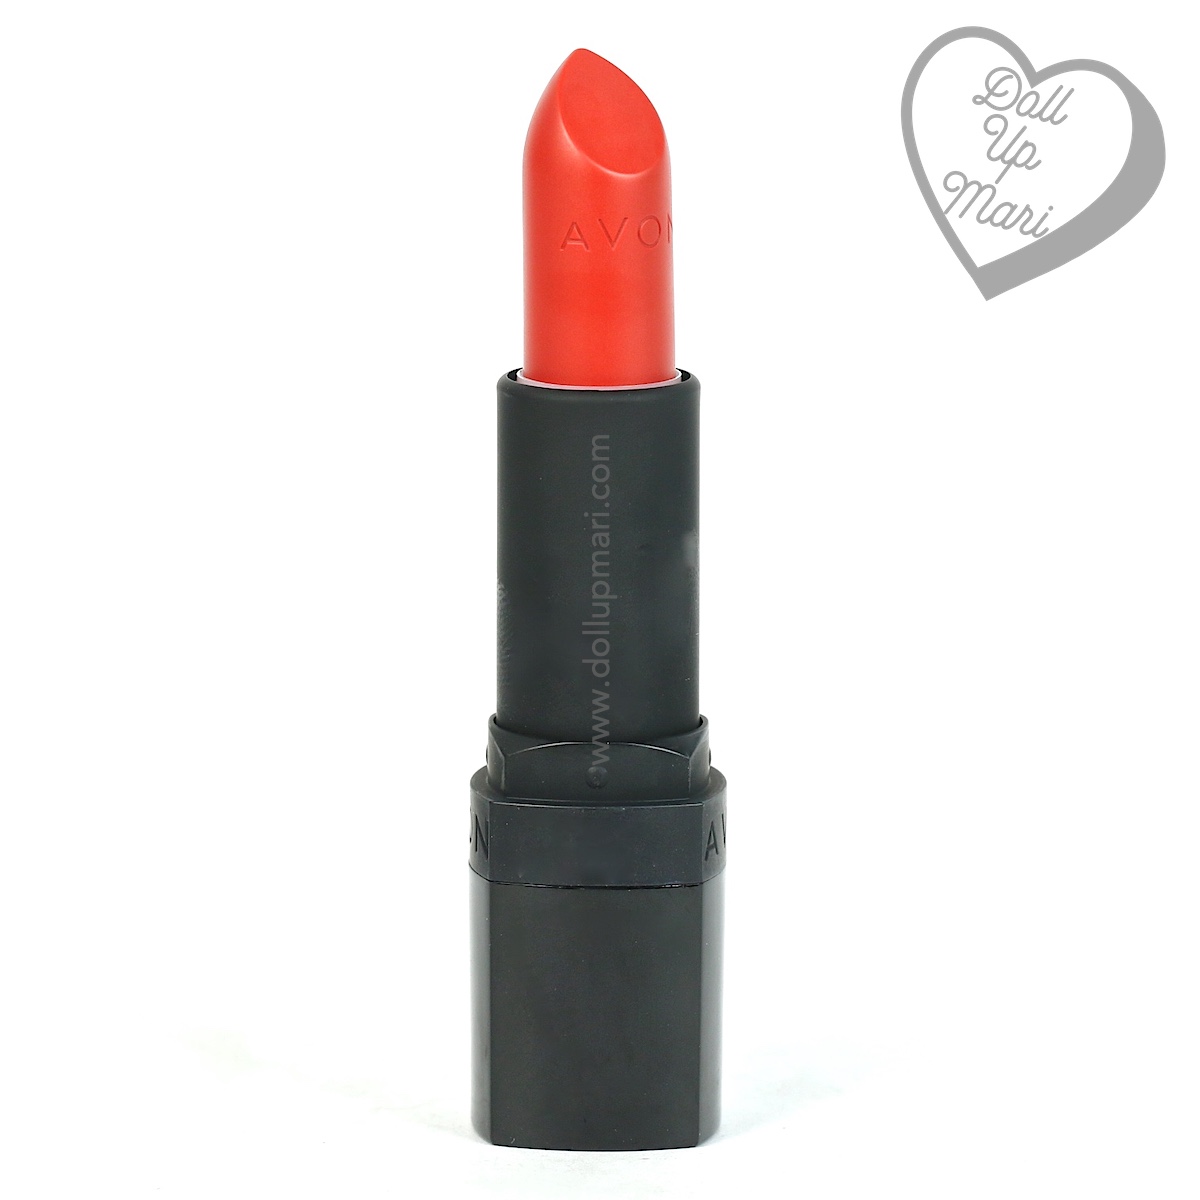 pack shot of Coral Fever shade of AVON Perfectly Matte Lipstick